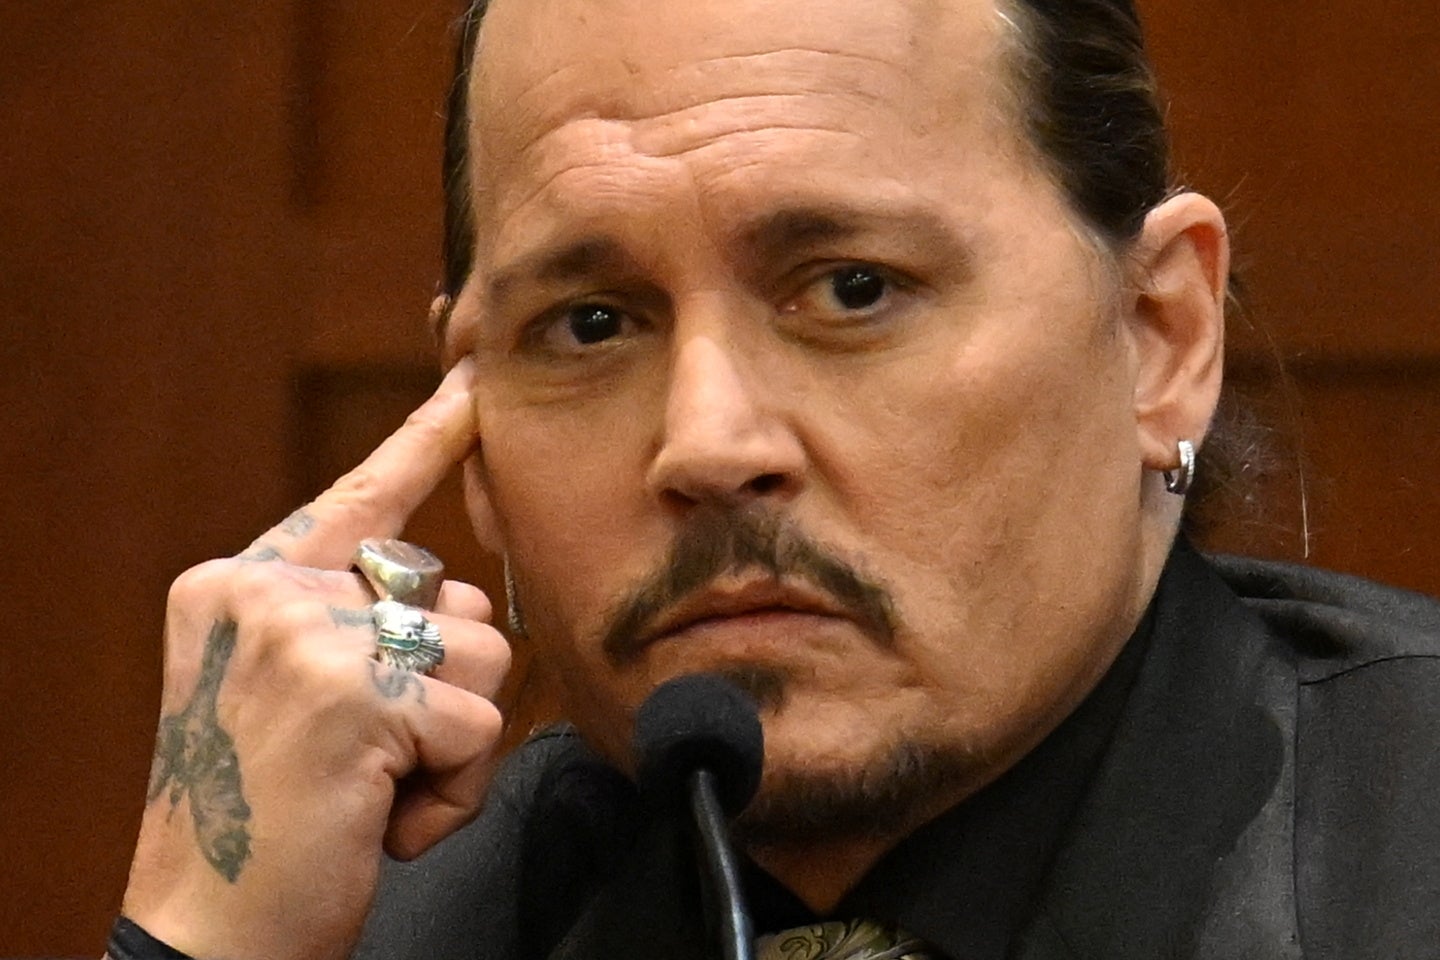 Actor Johnny Depp testifies at the Fairfax County Circuit Courthouse as his defamation case against ex-wife Amber Heard continues, in Fairfax, Virginia, U.S., April 19, 2022